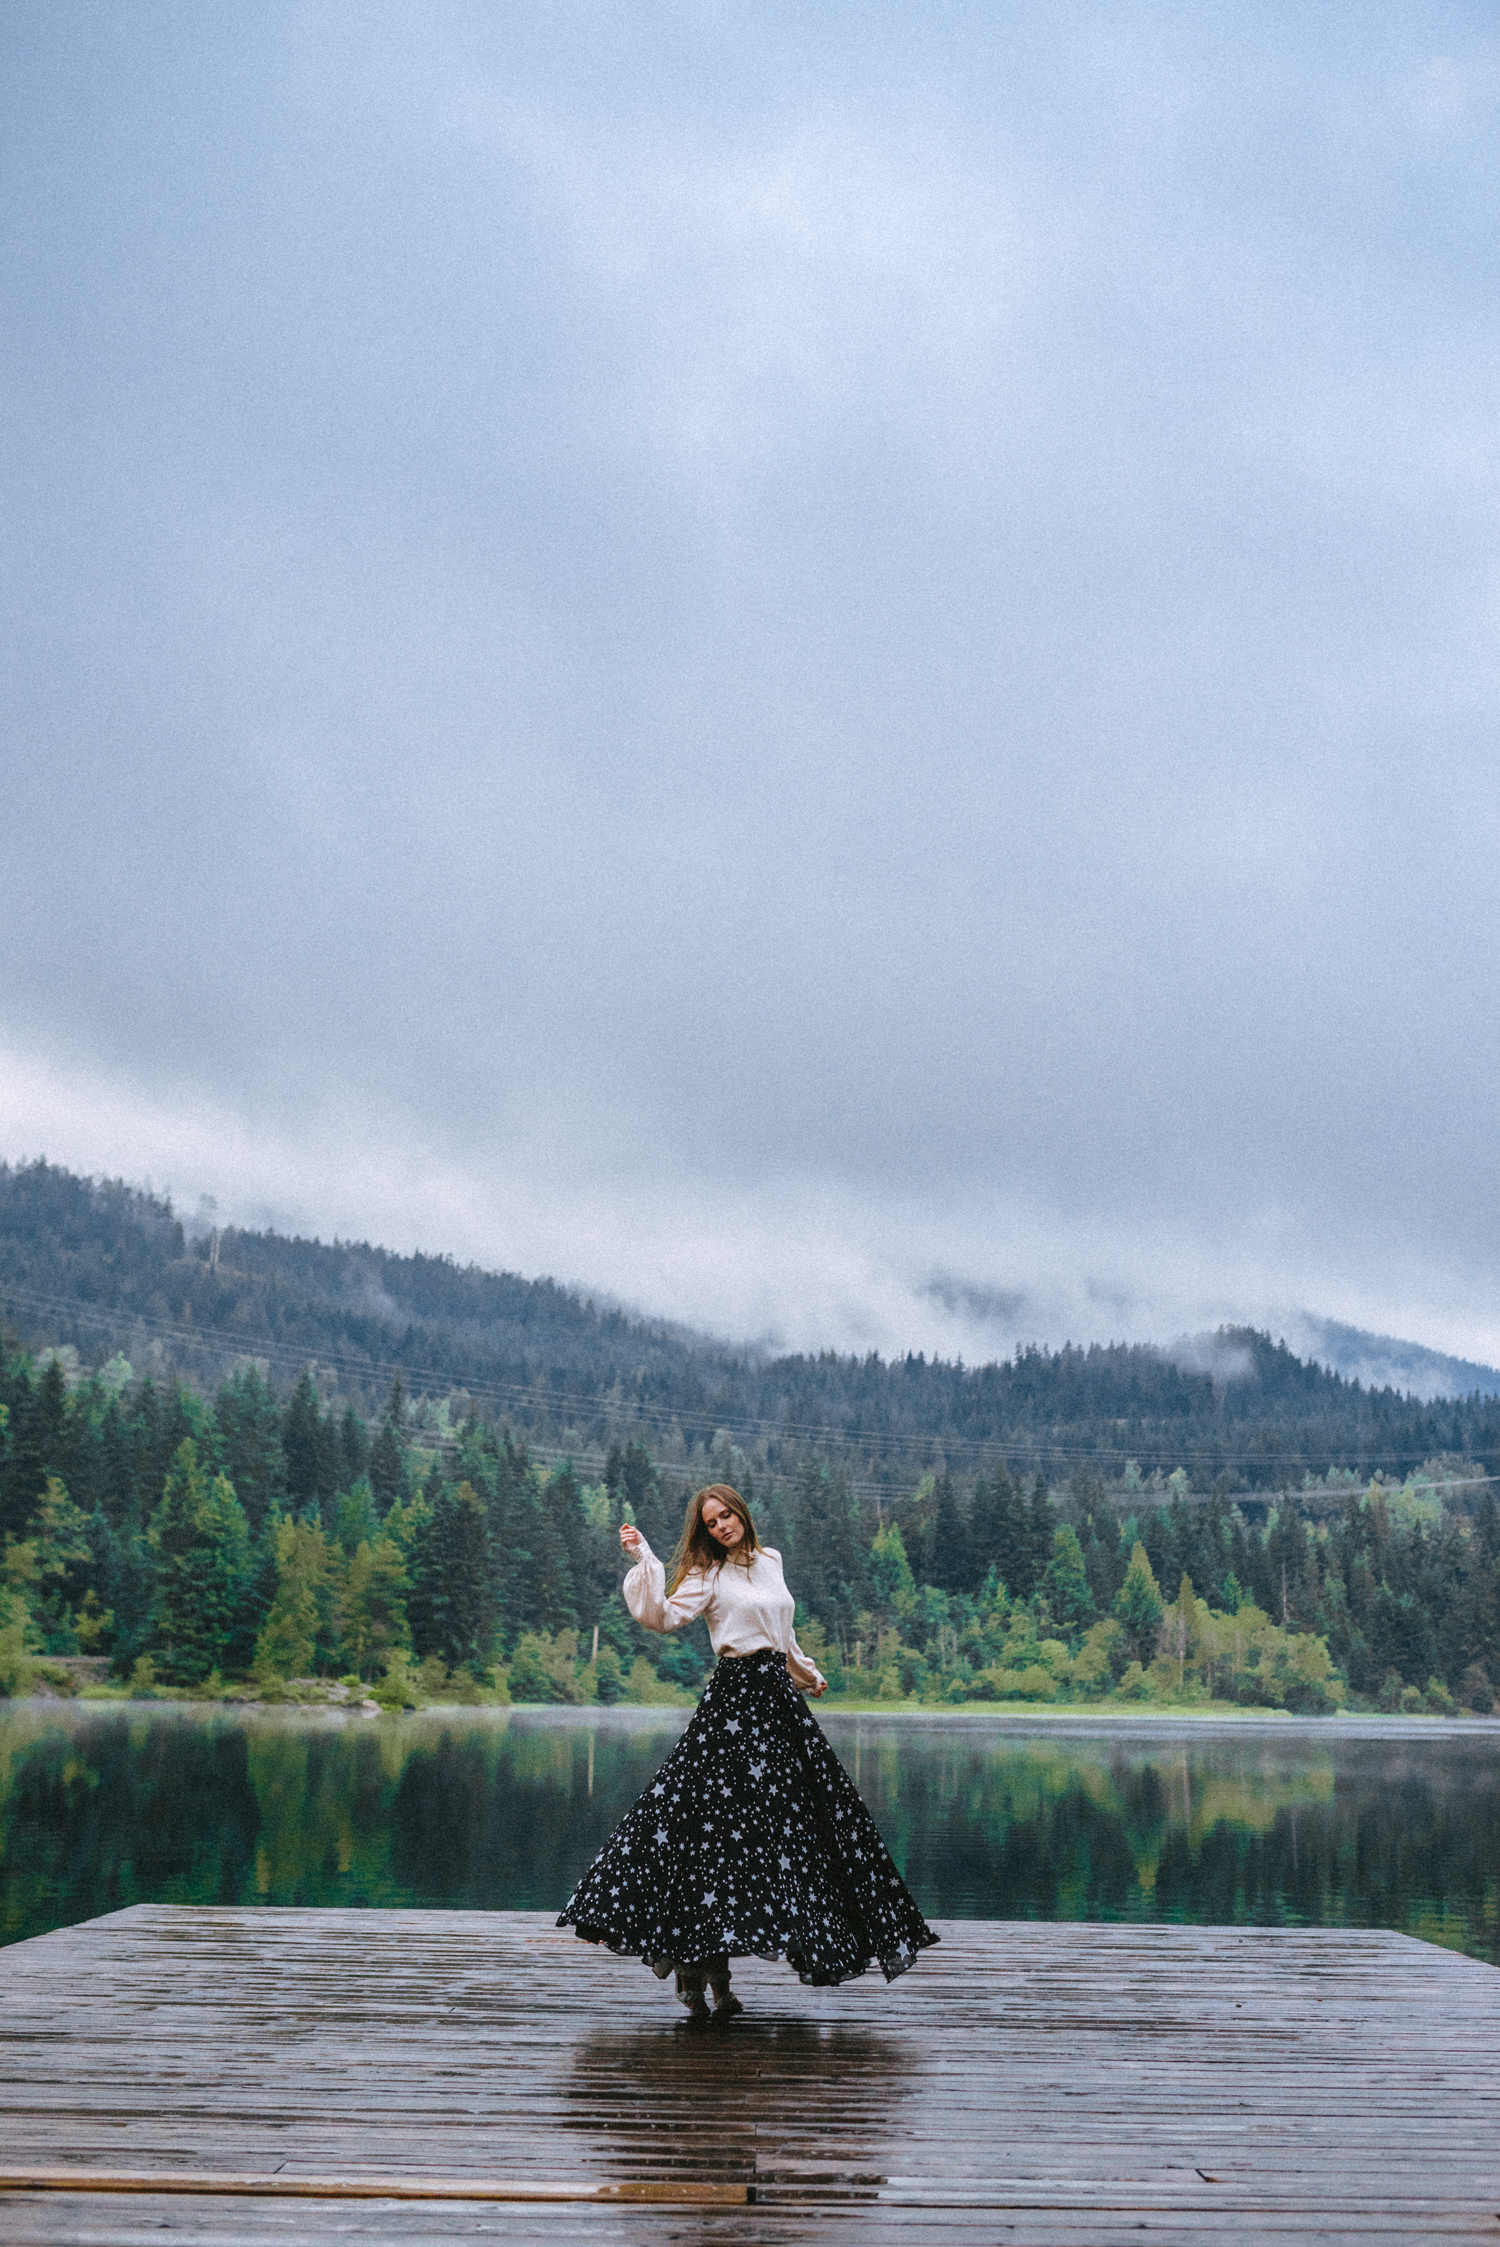 Alyssa Campanella of The A List shares her Whistler City Guide wearing LPA Top 340 and Lovers + Friends Hydra Skirt from Revolve at Nita Lake Lodge